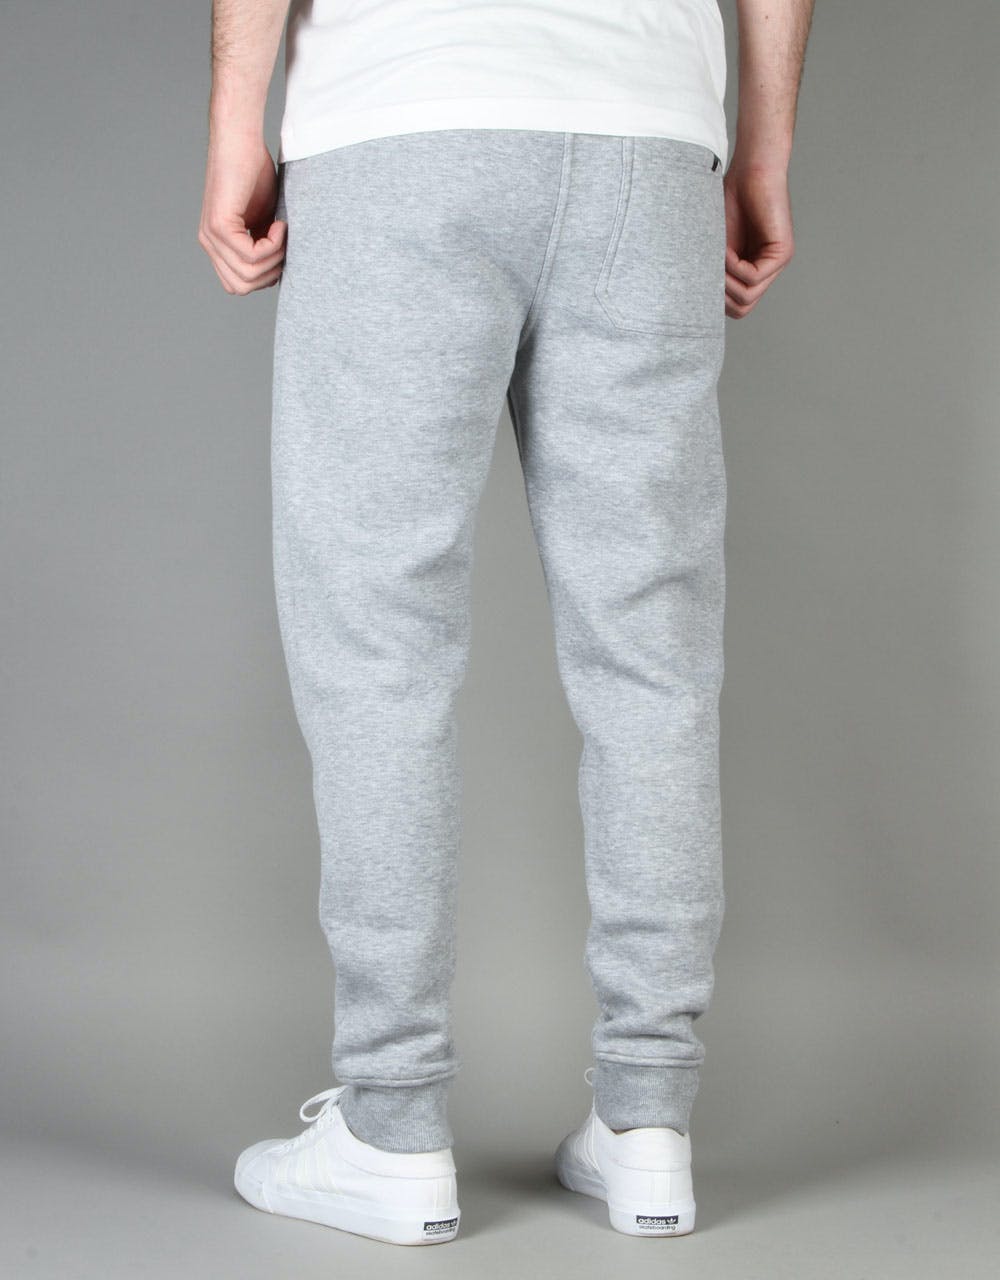 Route One Sweatpants - Light Grey Marl